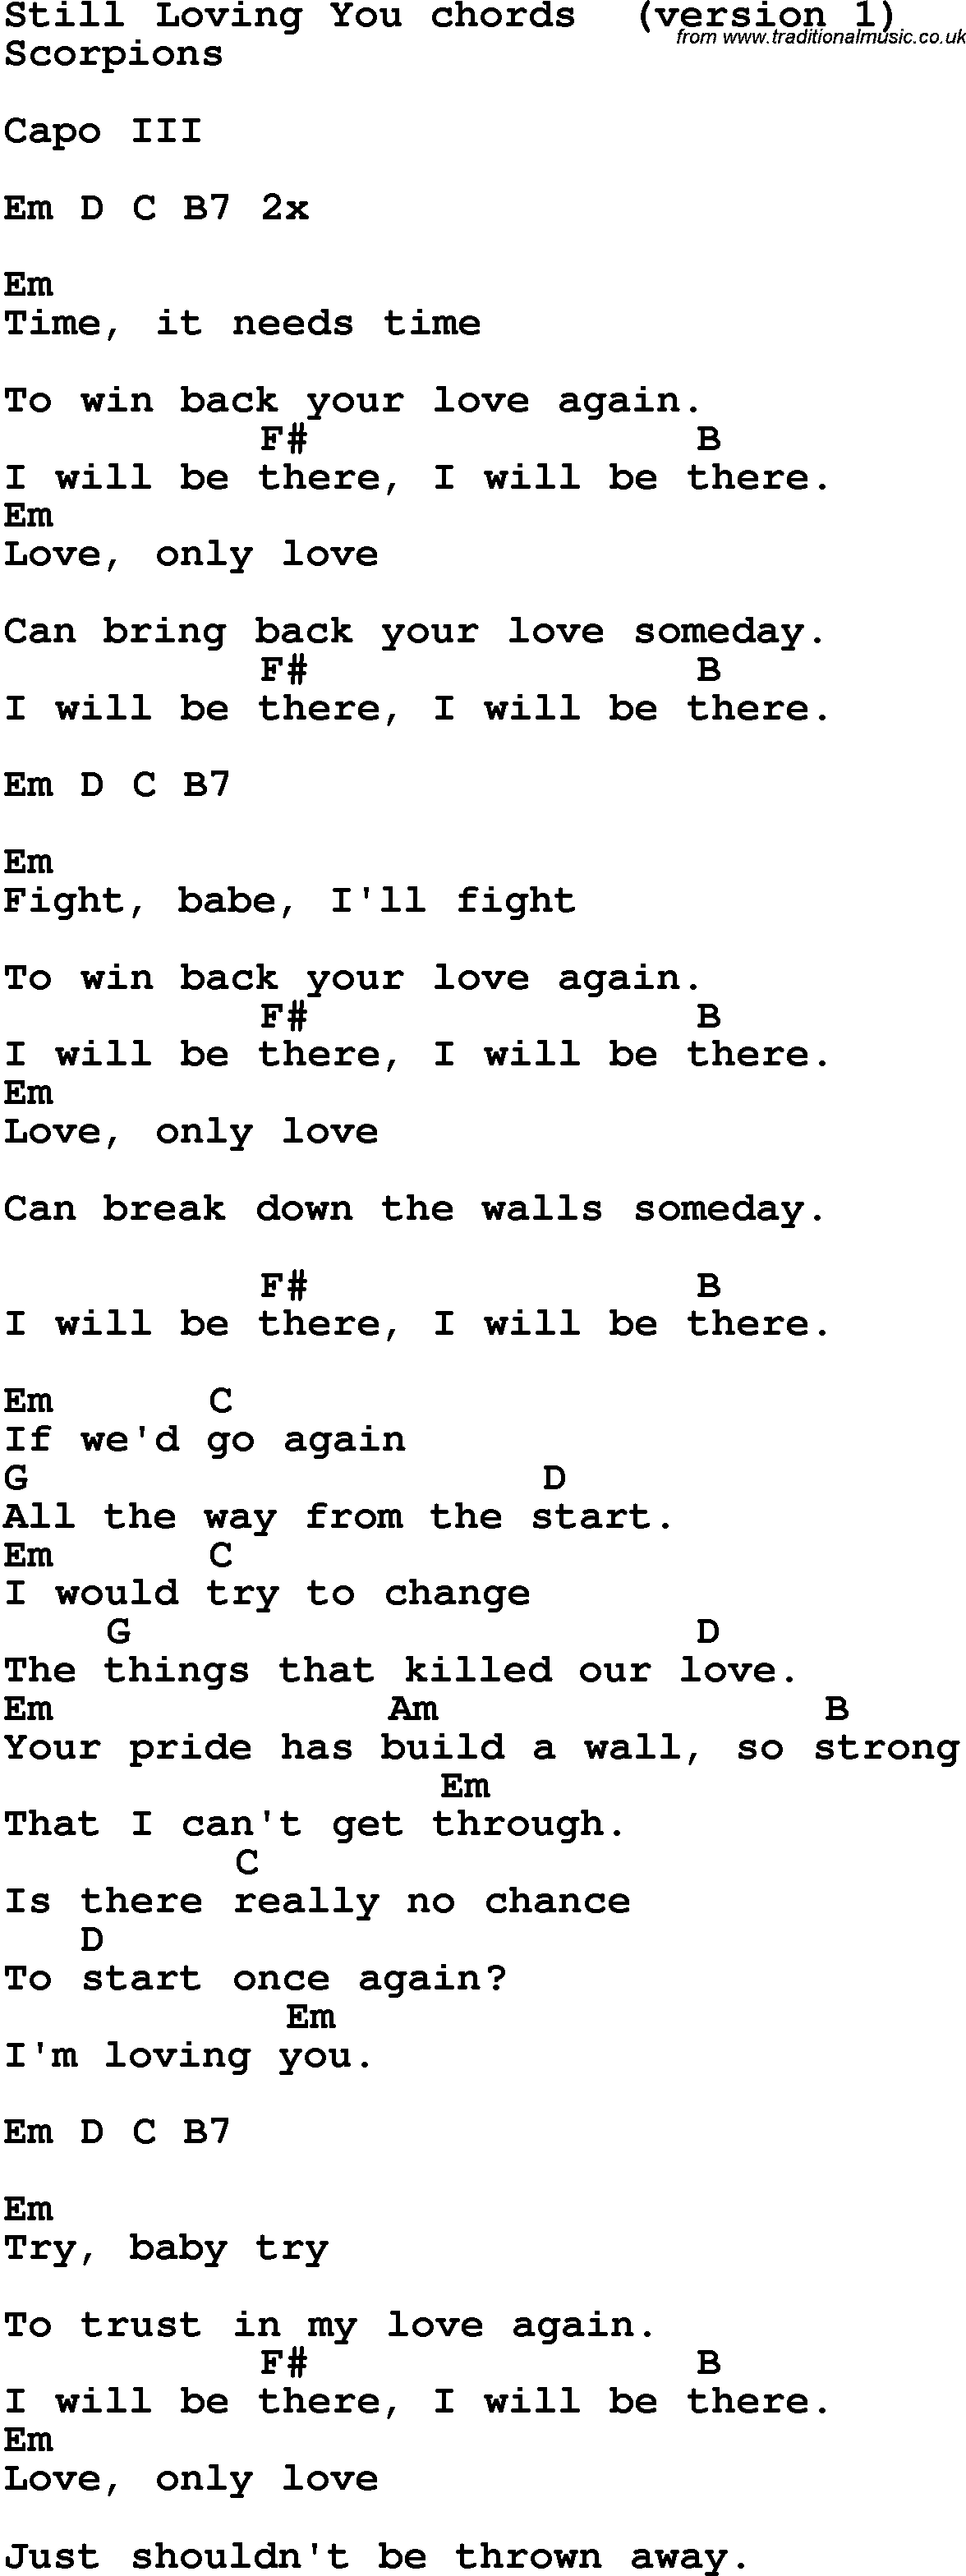 Song Lyrics with guitar chords for Still Loving You